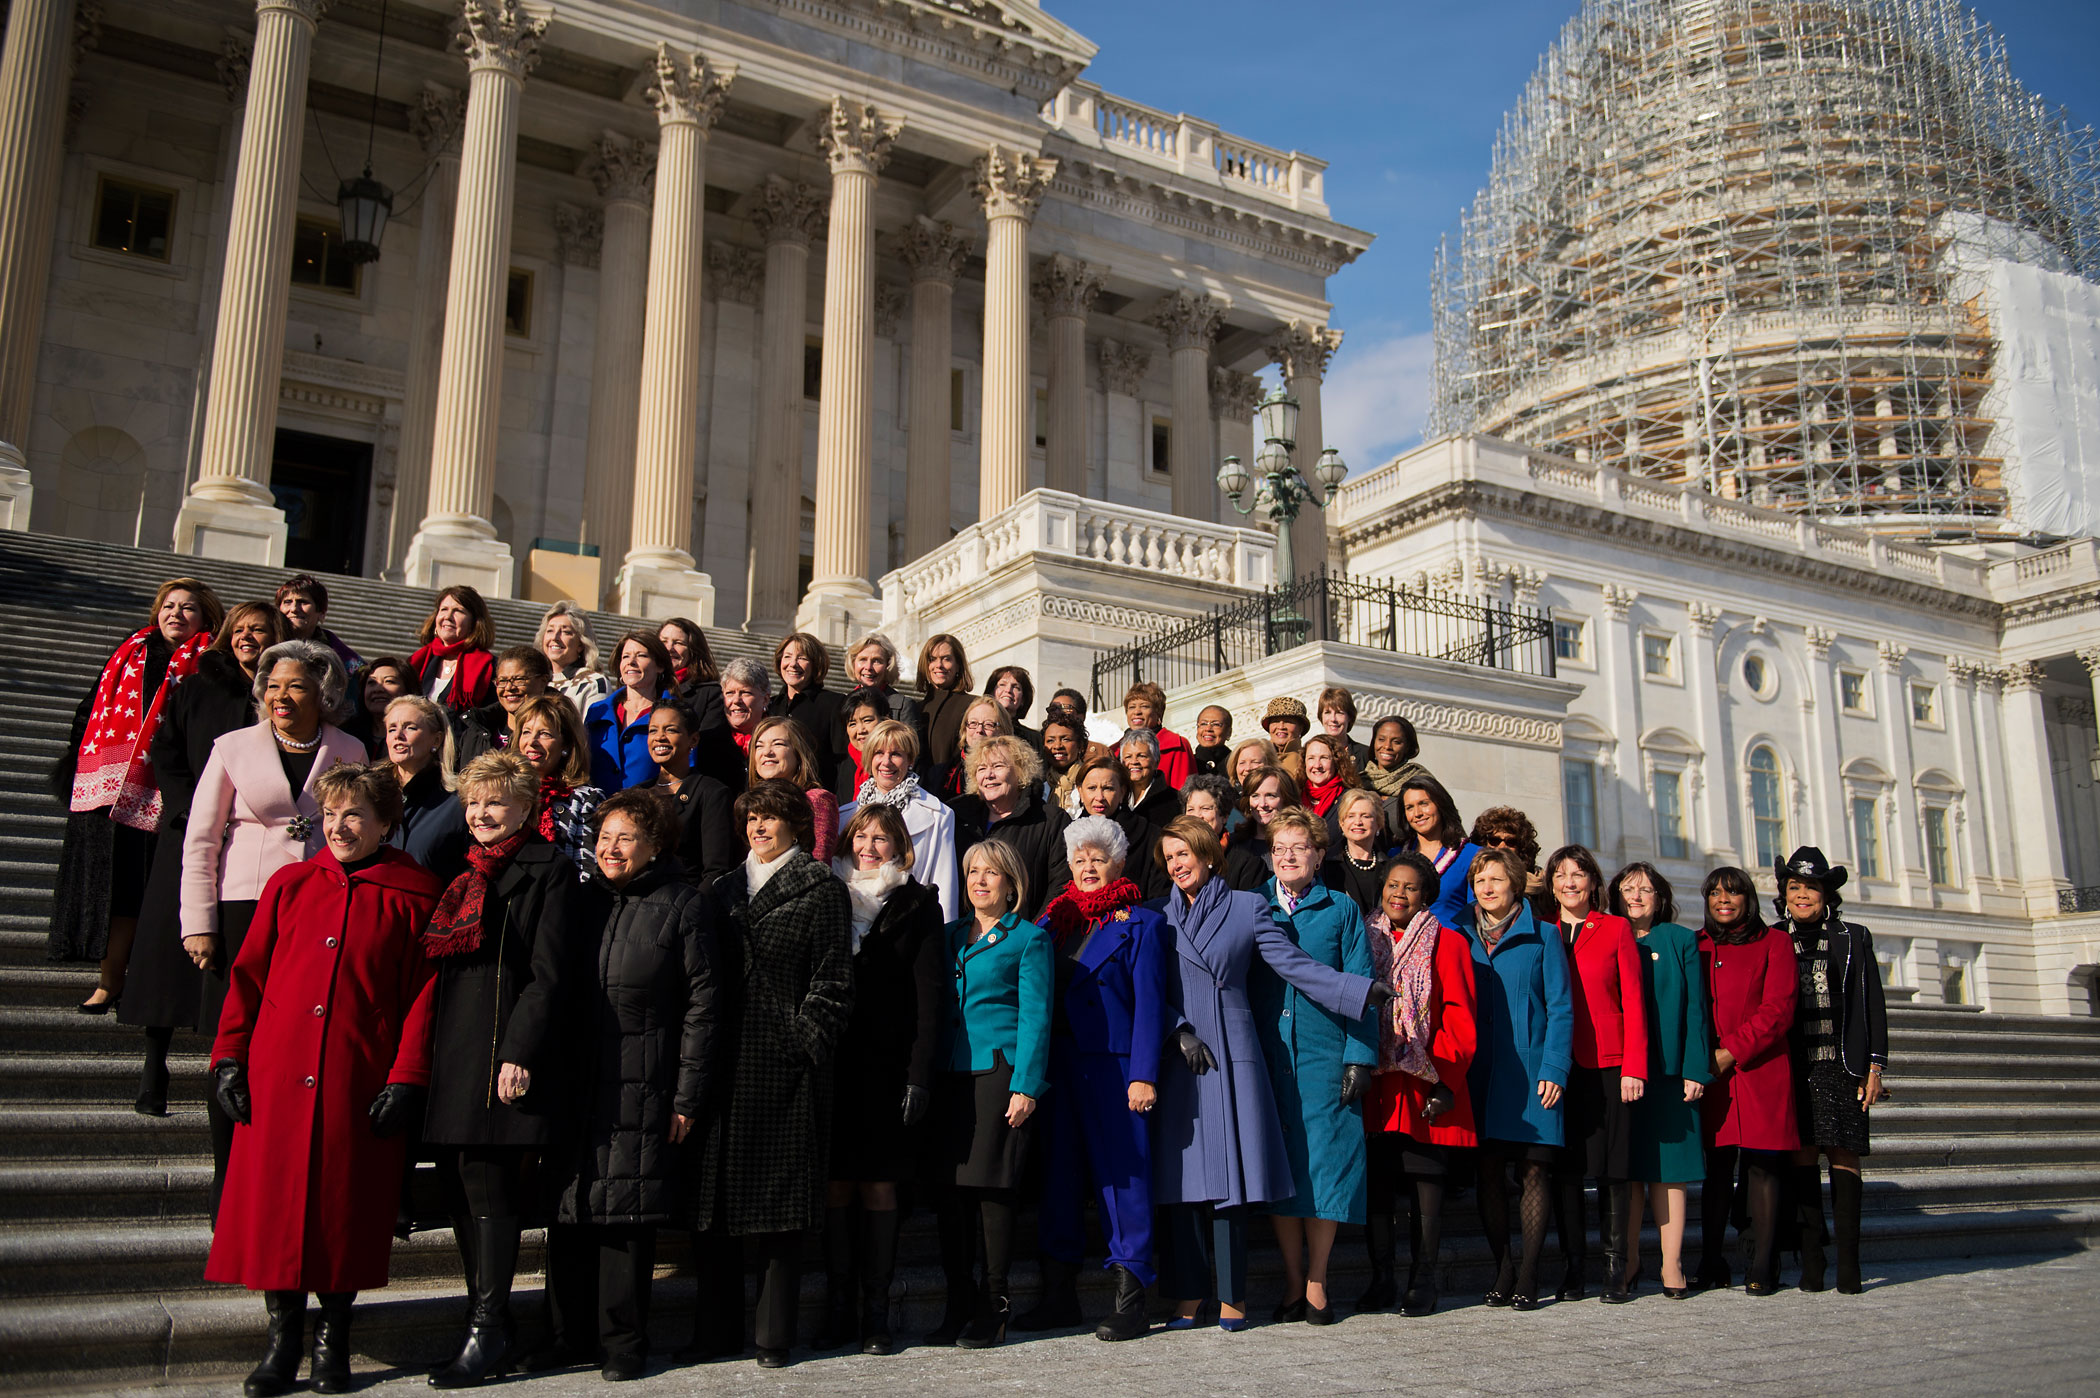 House Democratic women of the 114th Congress including House Minority Leader Nancy Pelosi, pose for a picture on the House steps of the Capitol, Jan. 7, 2015. (Tom Williams—CQ-Roll Call/Getty Images)